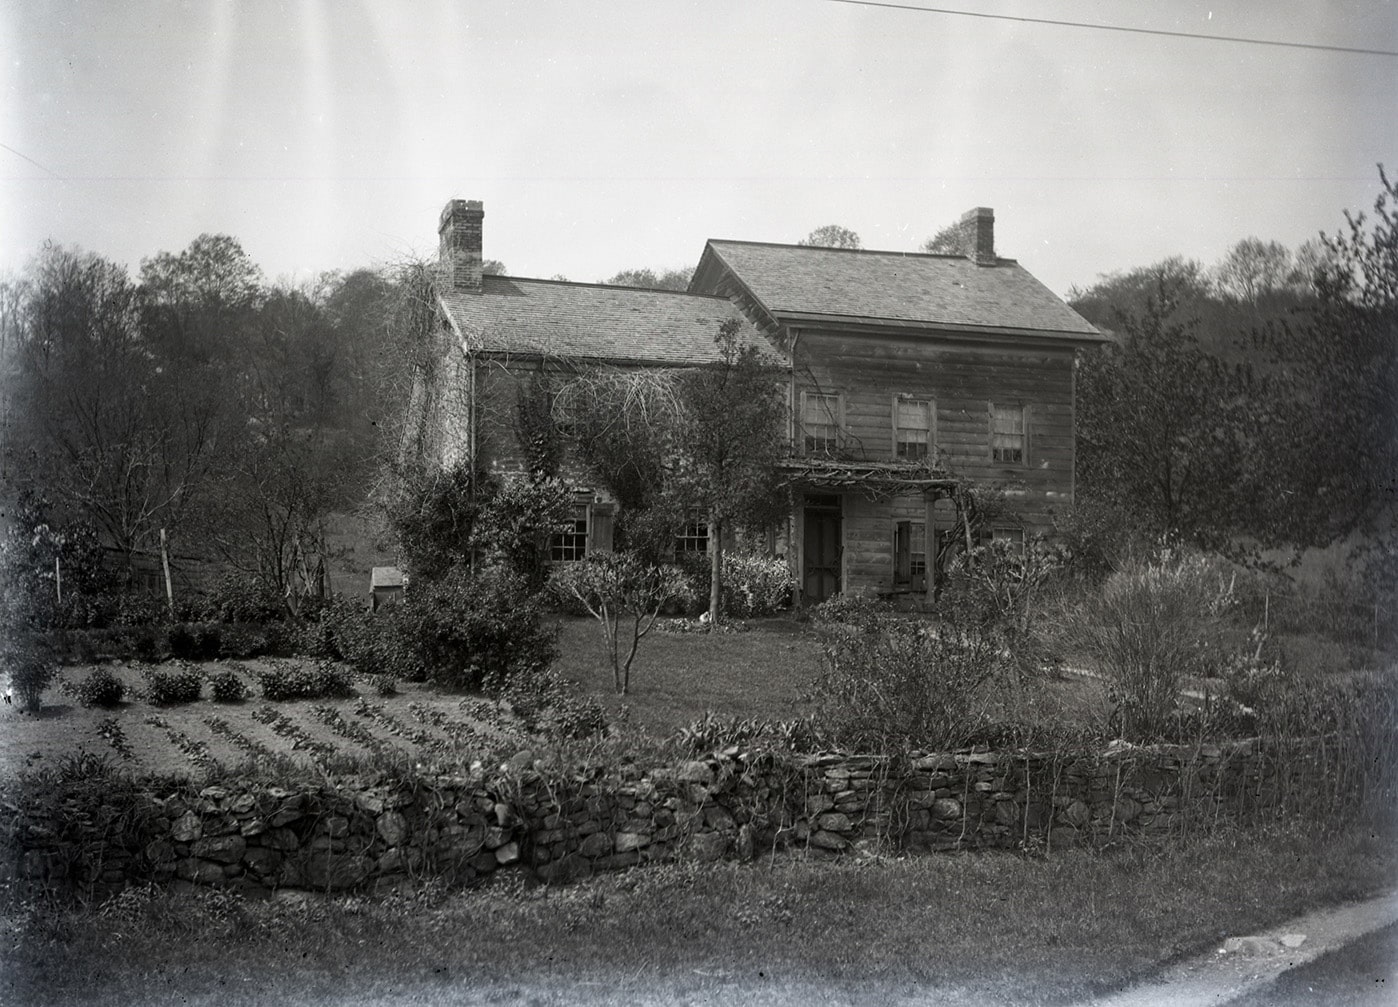 black and white photo showing a stone dwelling with a frame addition